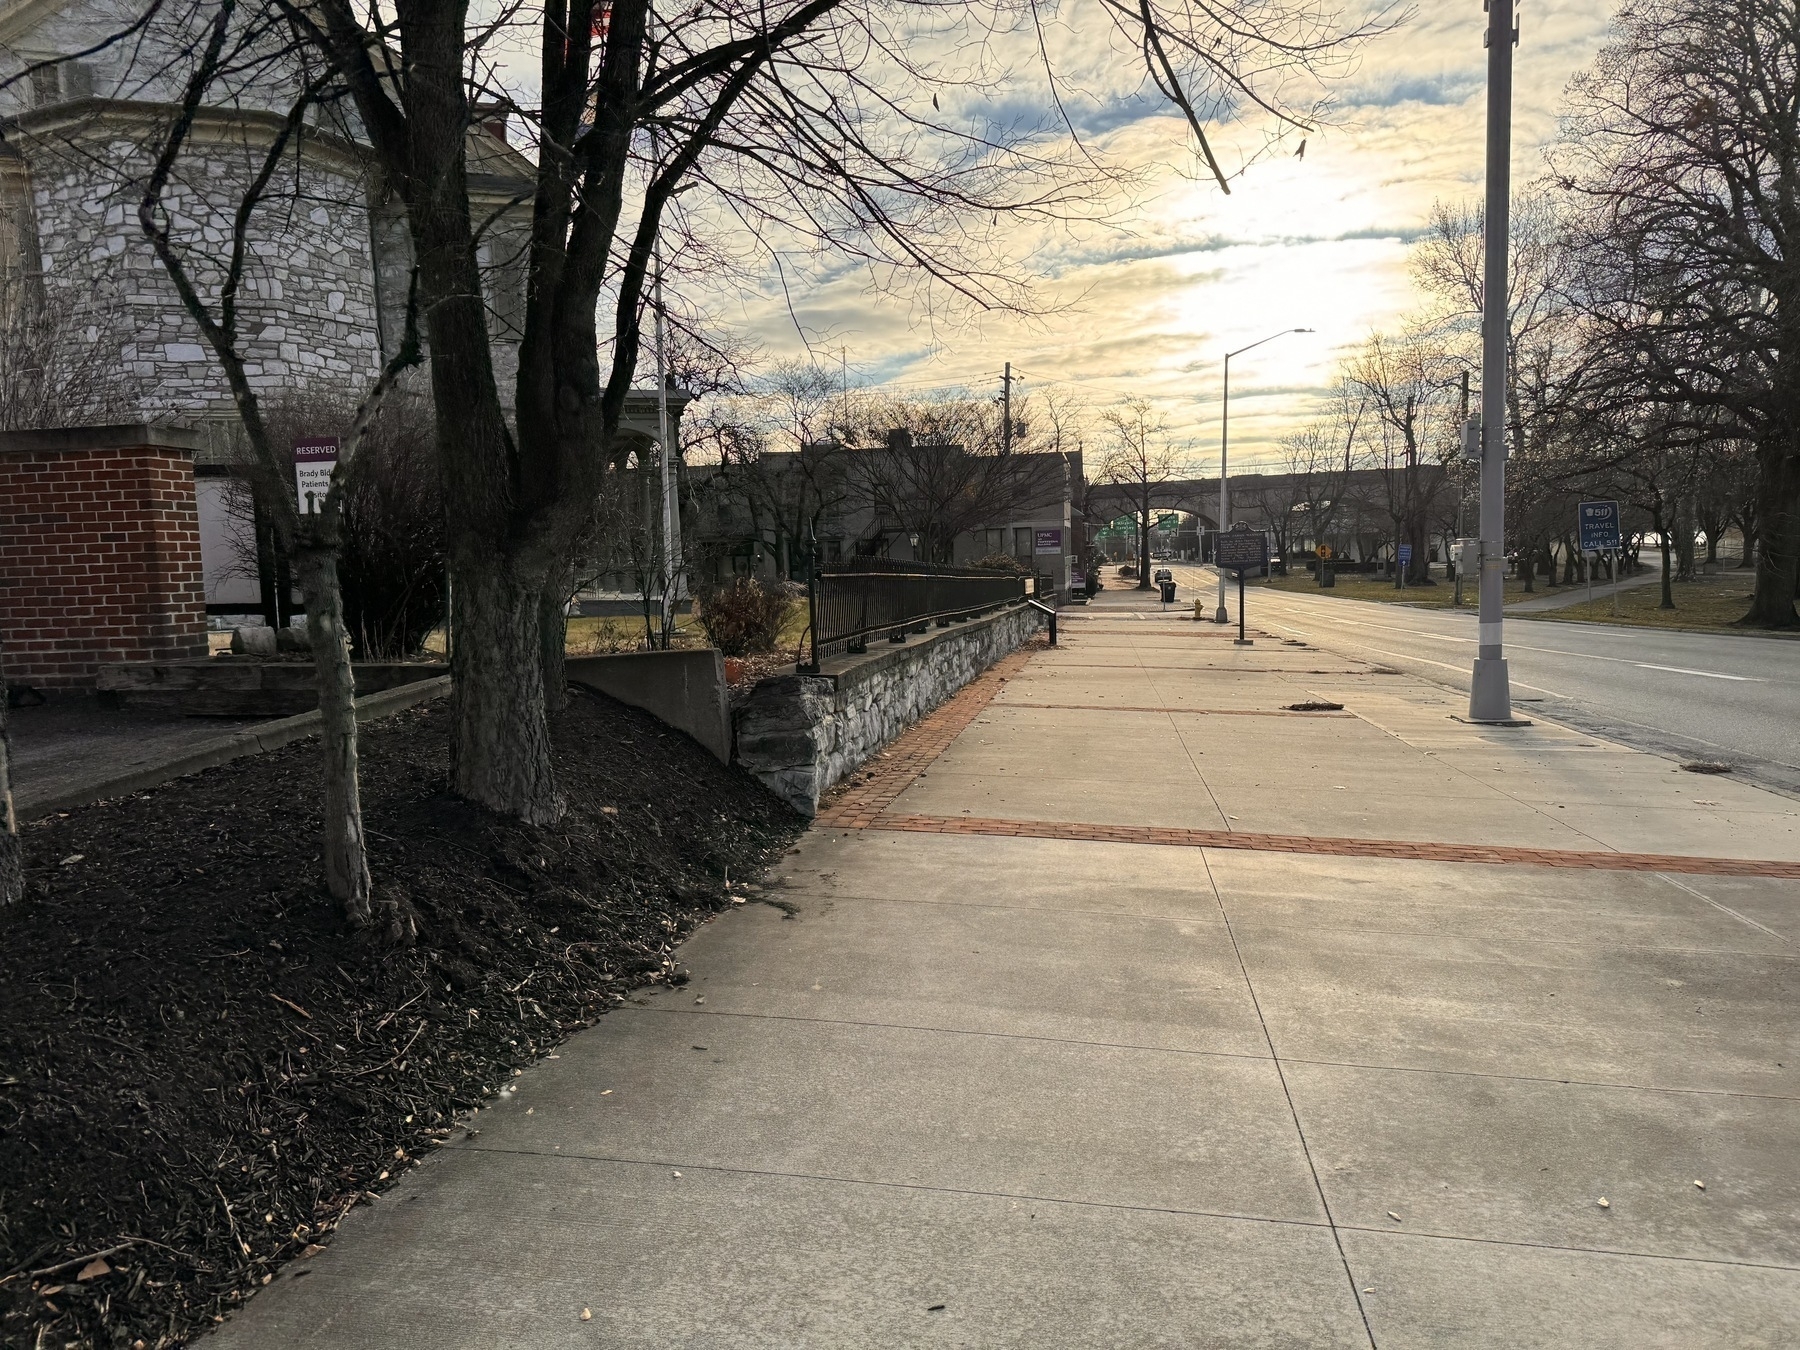 Photo from my walk this morning along Front street in Harrisburg Pennsylvania. John Harris Mansion is to the left, cloudy sky above with the sun shining through.